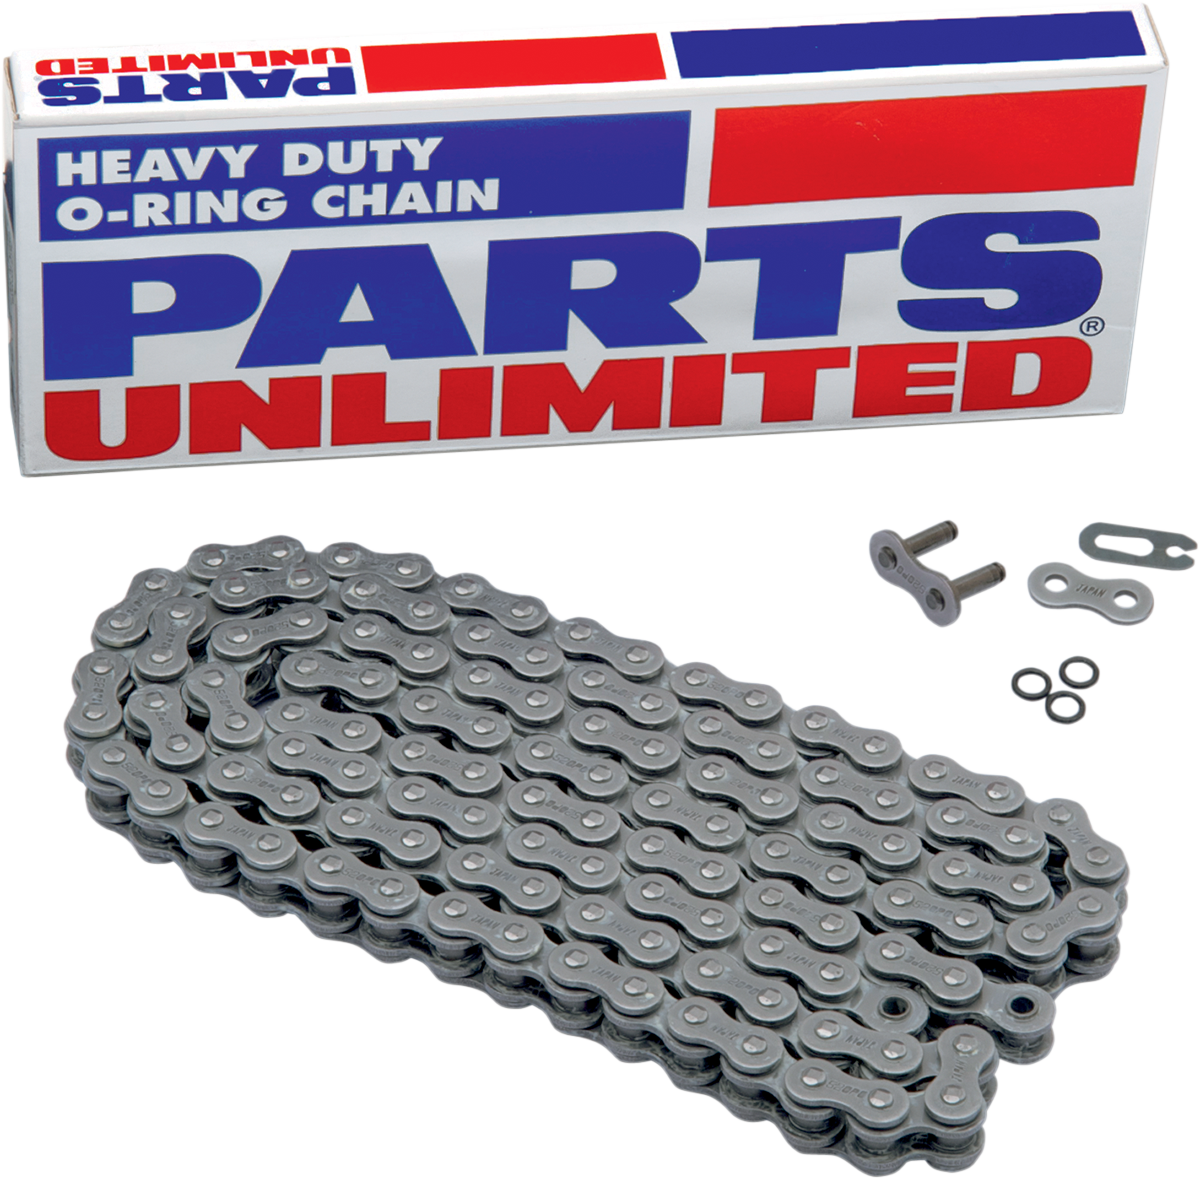 PARTS UNLIMITED-CHAIN MOTORCYCLE CHAIN CHAIN PU 520 O-RNG X 108L